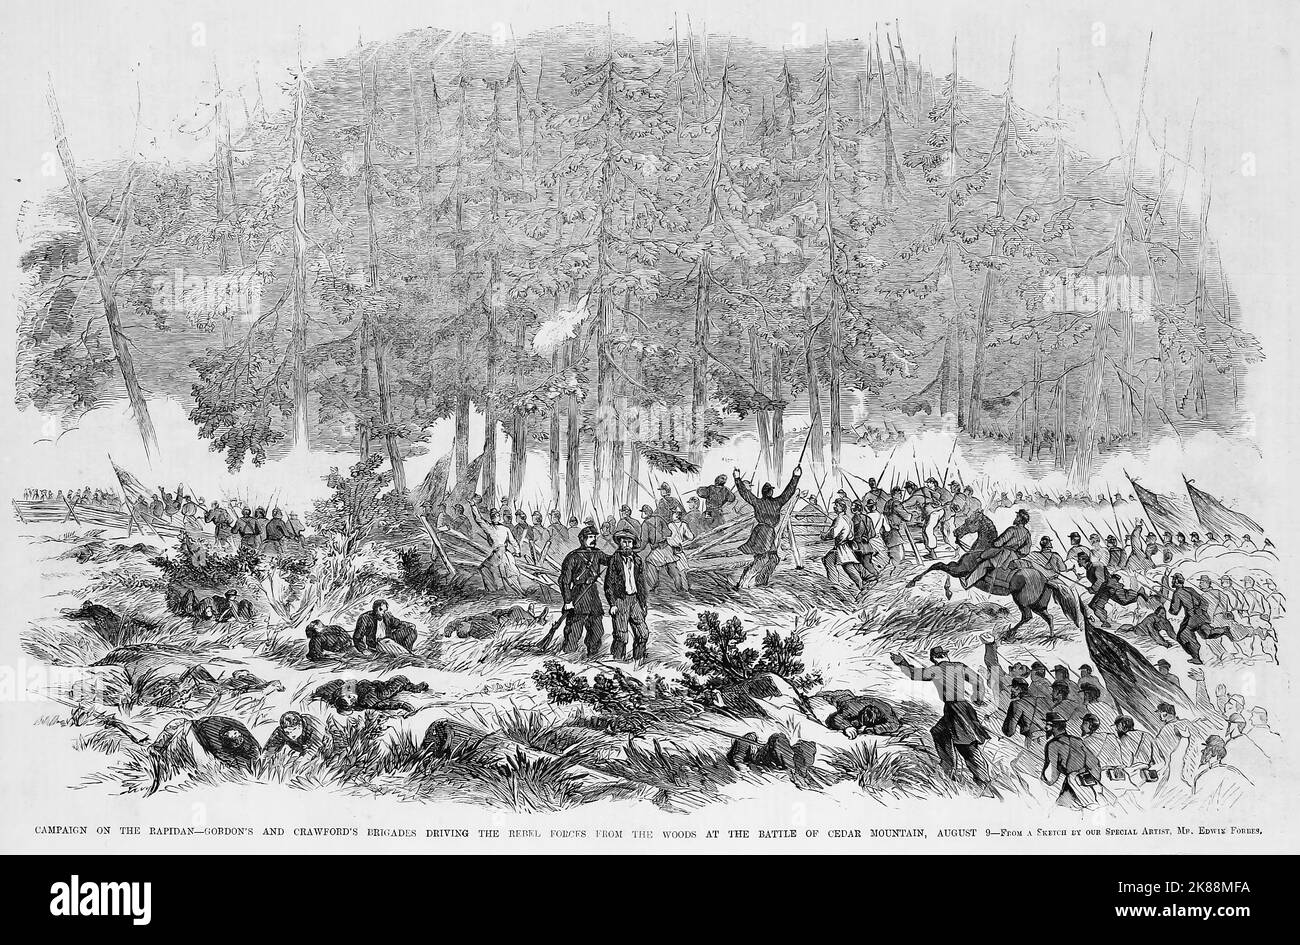 Campaign on the Rapidan - George Henry Gordon's and Samuel Wylie Crawford's Brigades driving the Rebel forces from the woods at the Battle of Cedar Mountain, August 9th, 1862. 19th century American Civil War illustration from Frank Leslie's Illustrated Newspaper Stock Photo